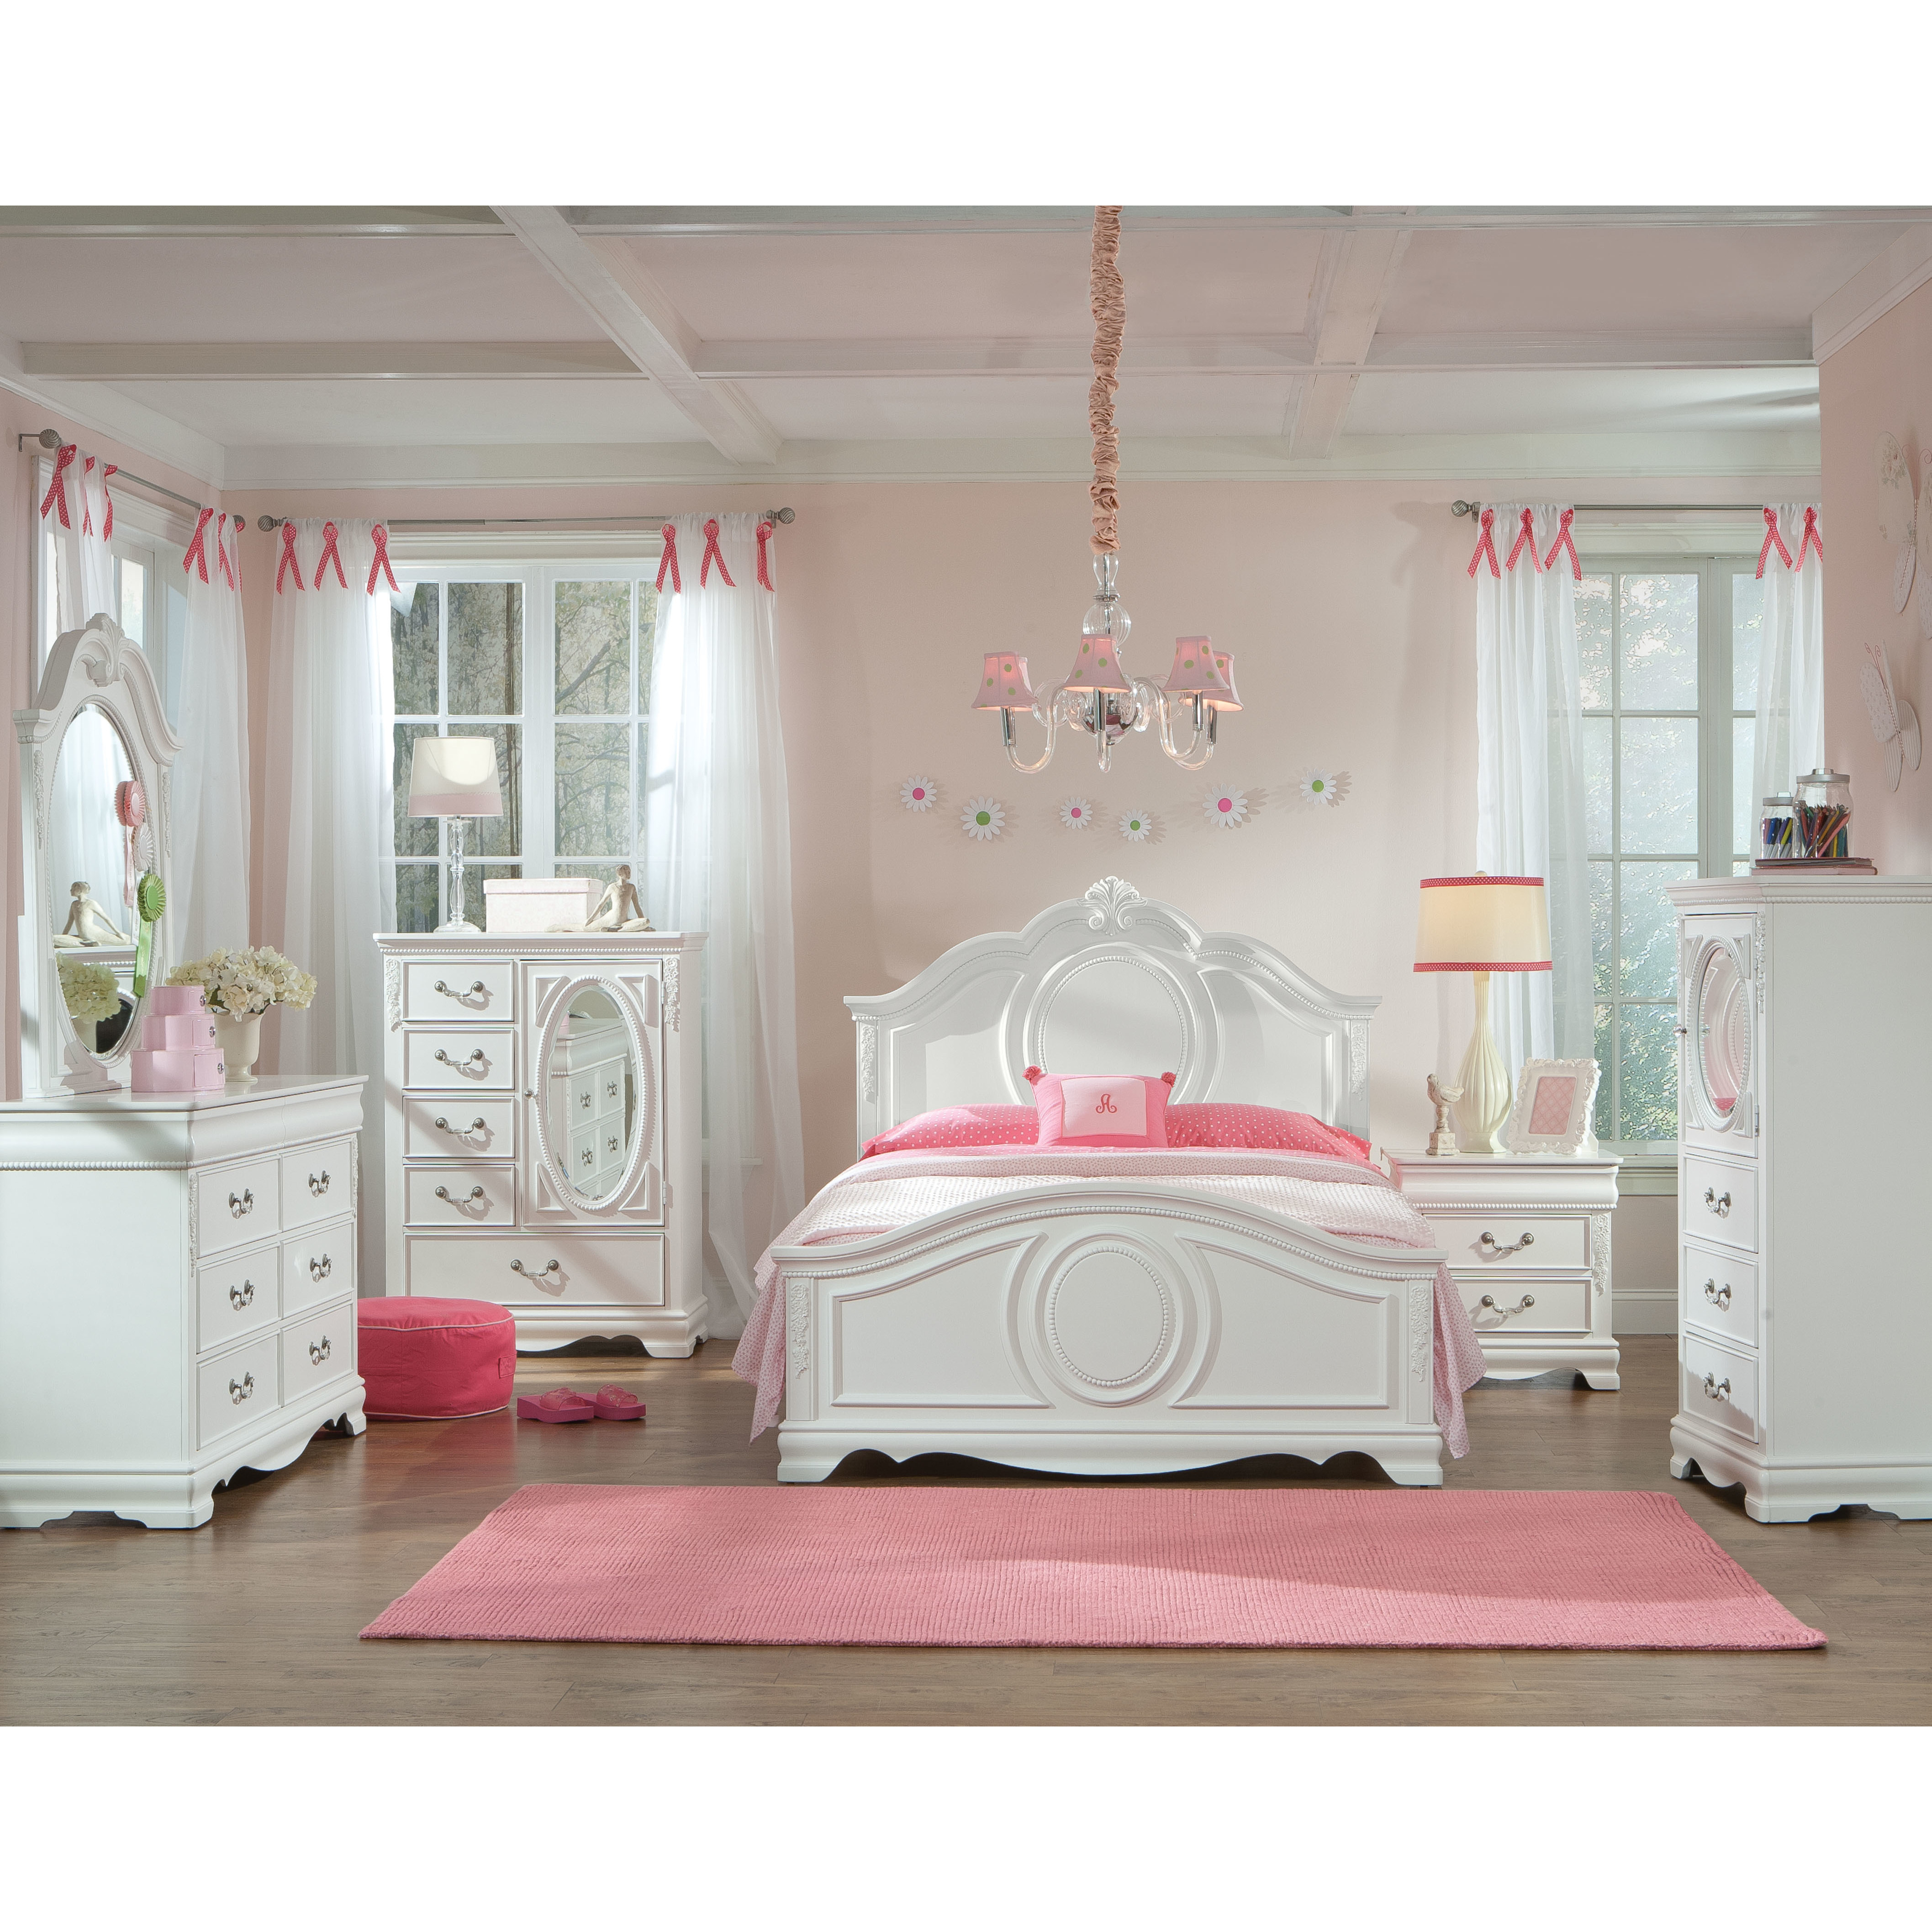 Exciting Girl White Bedroom Furniture For Trendy Sets King Wooden pertaining to size 4230 X 4230